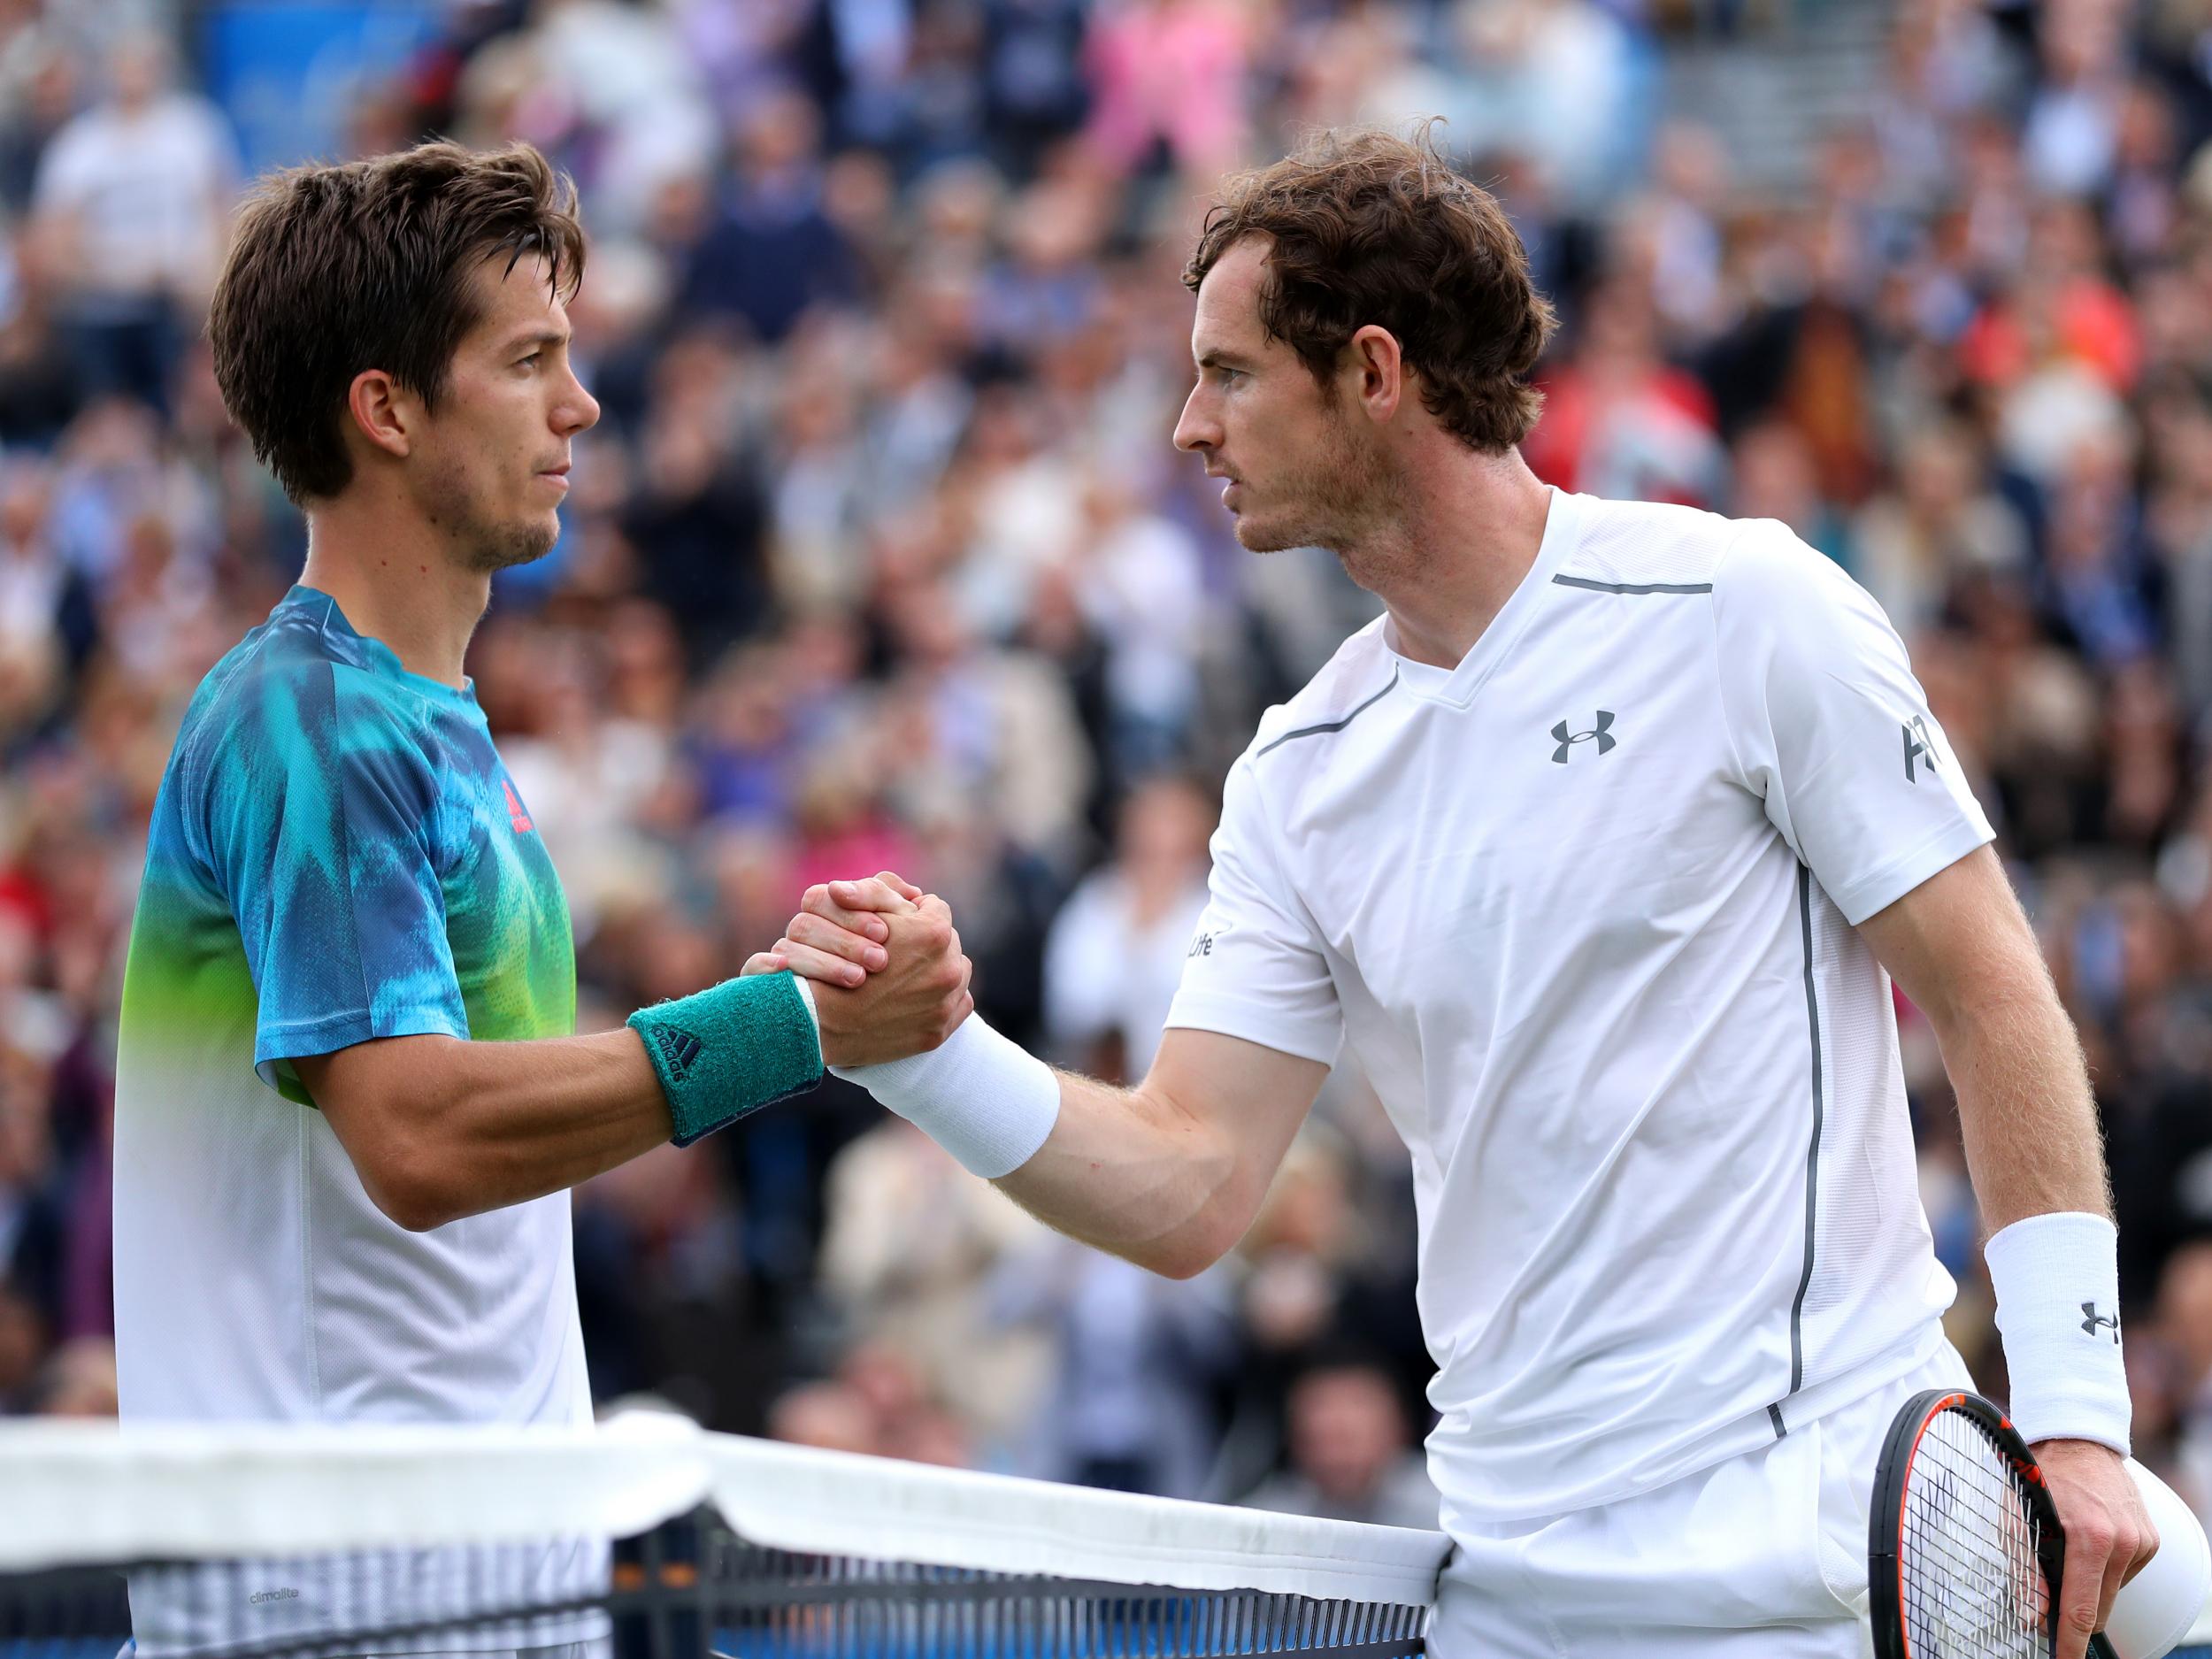 Murray has defended Bedene in the past